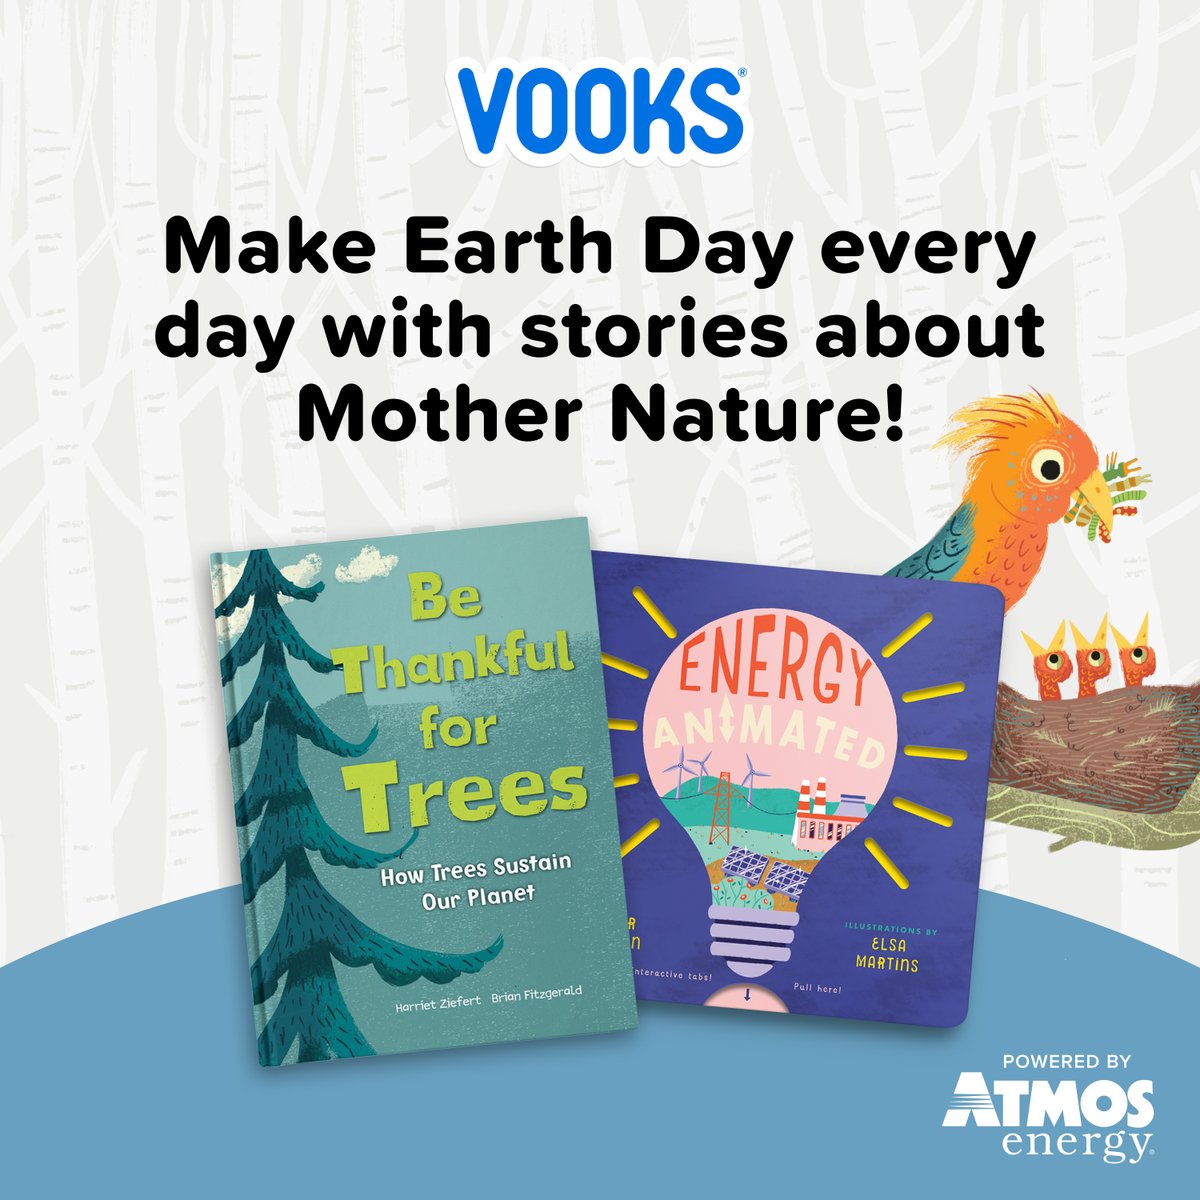 #EarthDay is a couple weeks aways, so why not turn over a new leaf this #LibraryWeek with a good book from @vooks? 📚🌳 With these storybooks brought to life, you can almost feel the earth beneath your feet! Get your 1-year free subscription at ow.ly/jCbt50QYQe4.